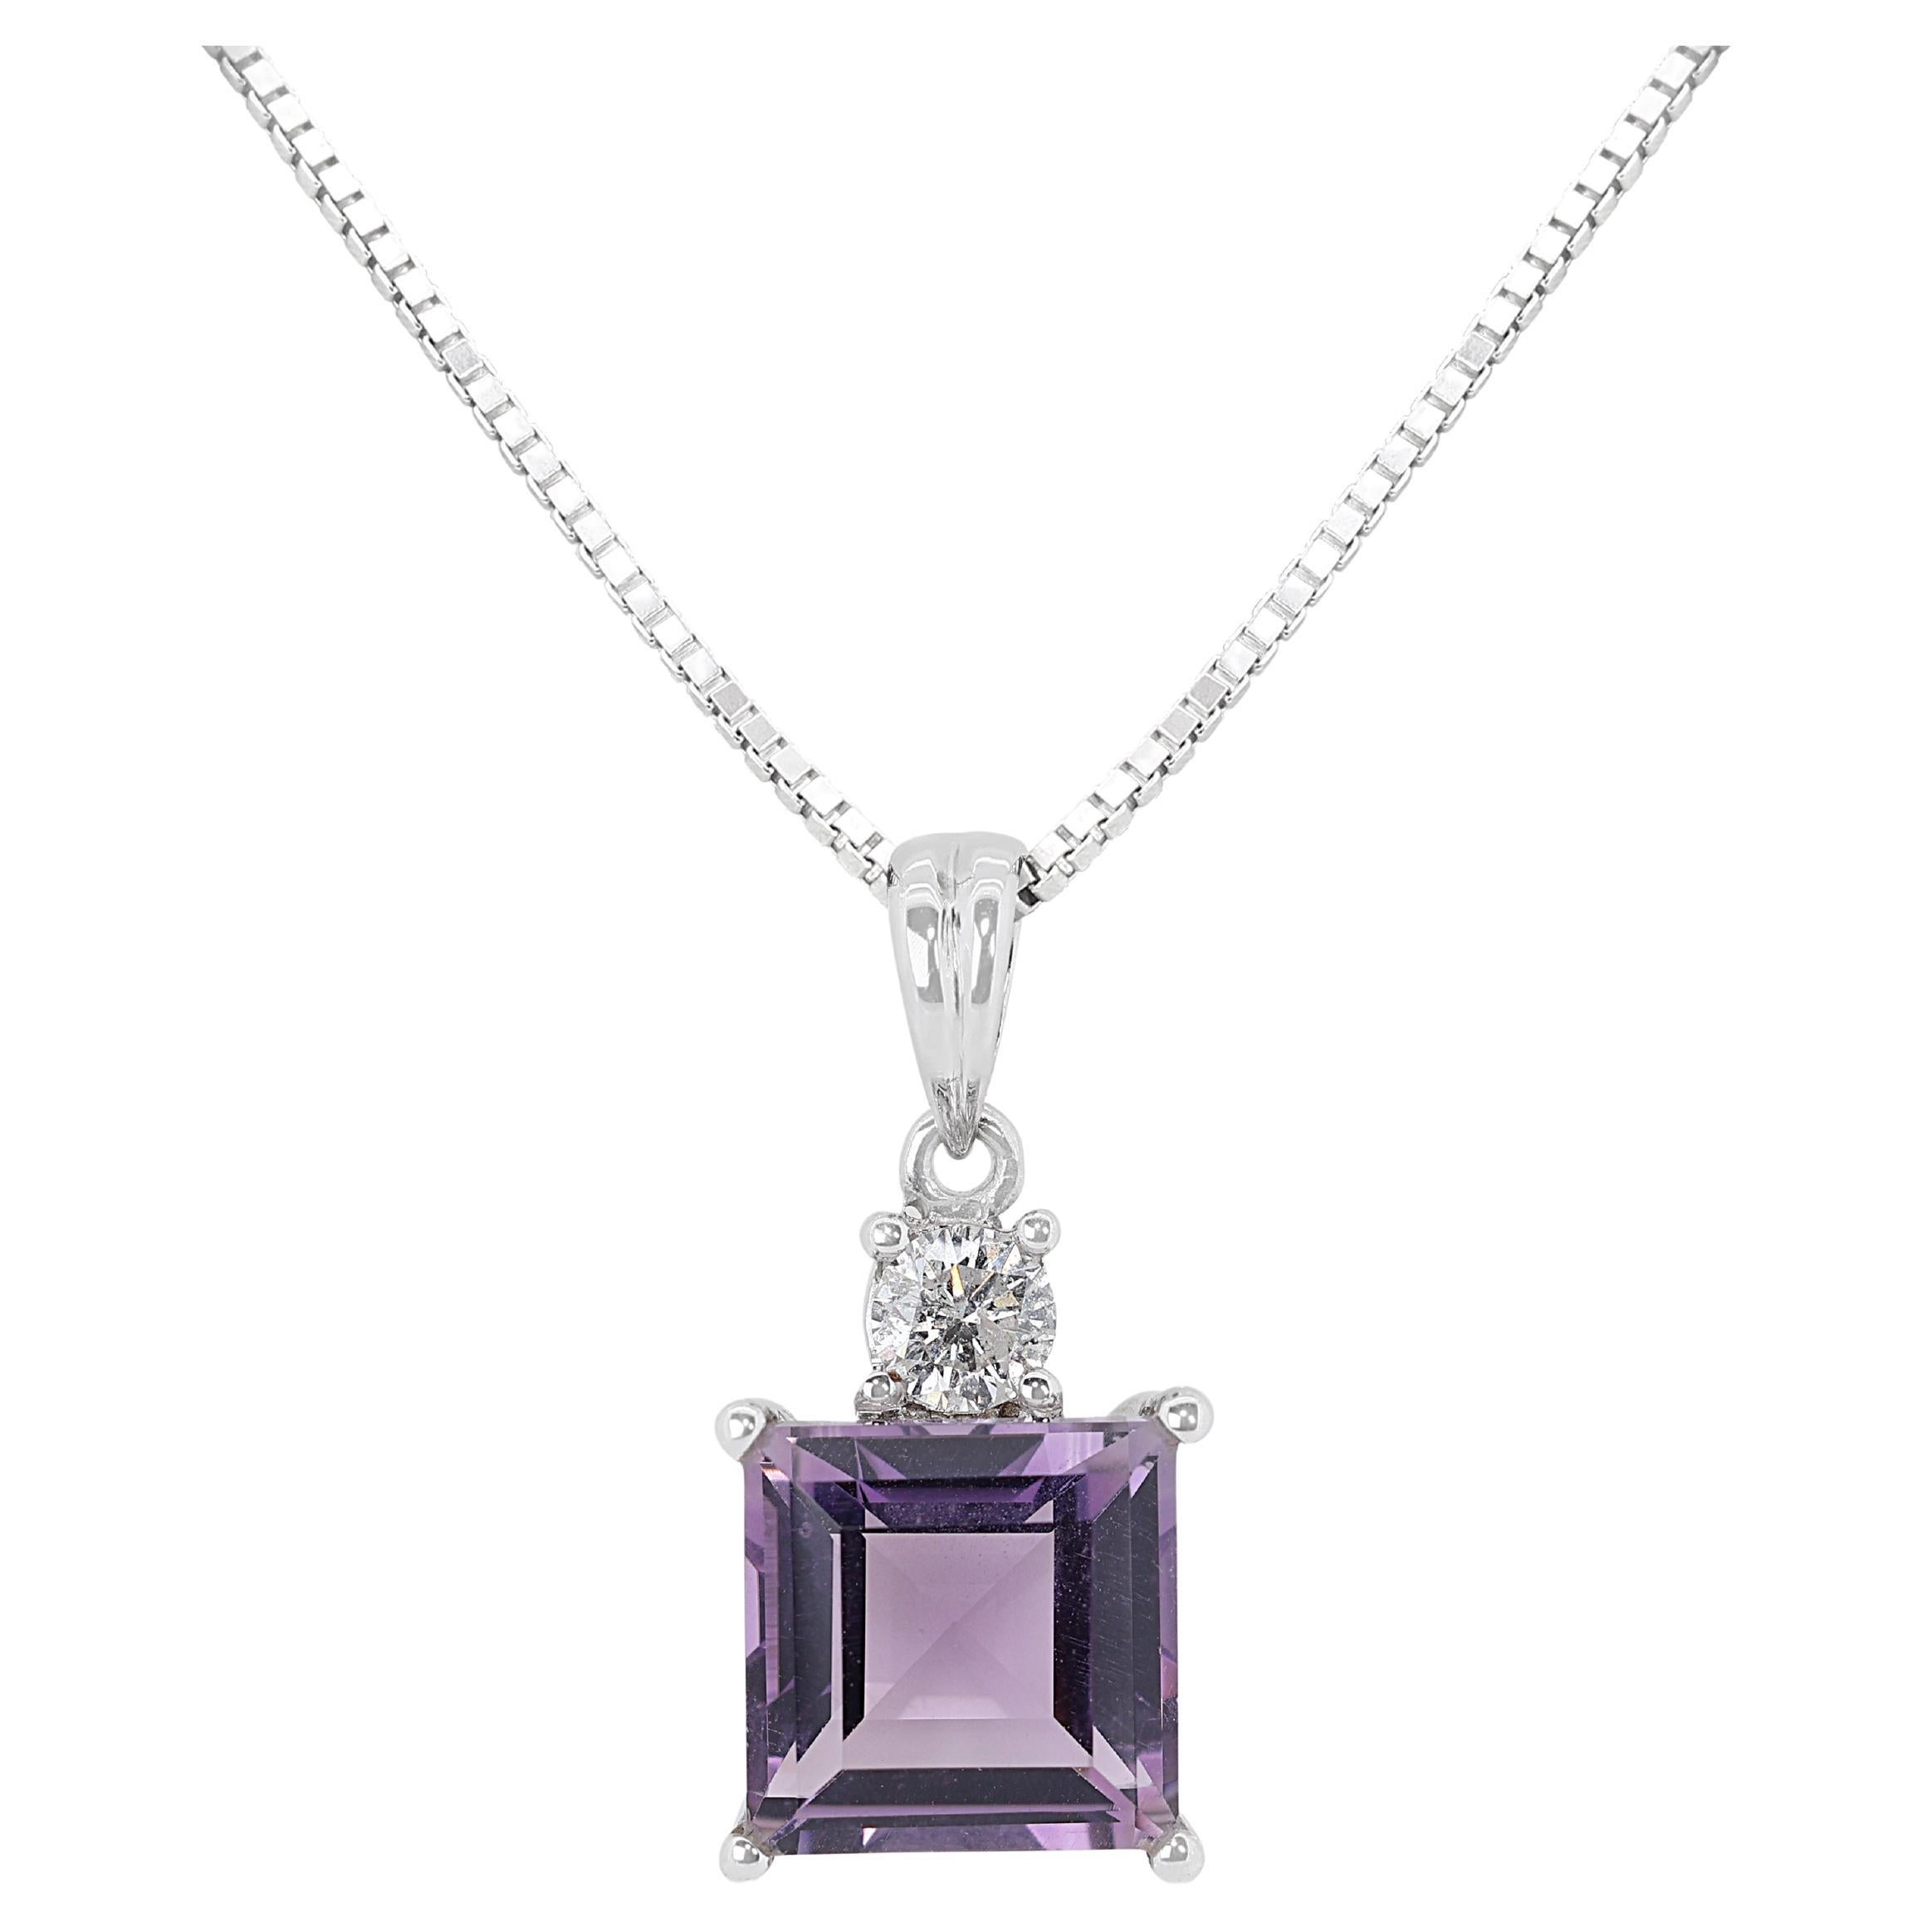 Elegant 1.94ct Amethyst Pendant w/ Diamonds in 18K White Gold-Chain Not Included For Sale